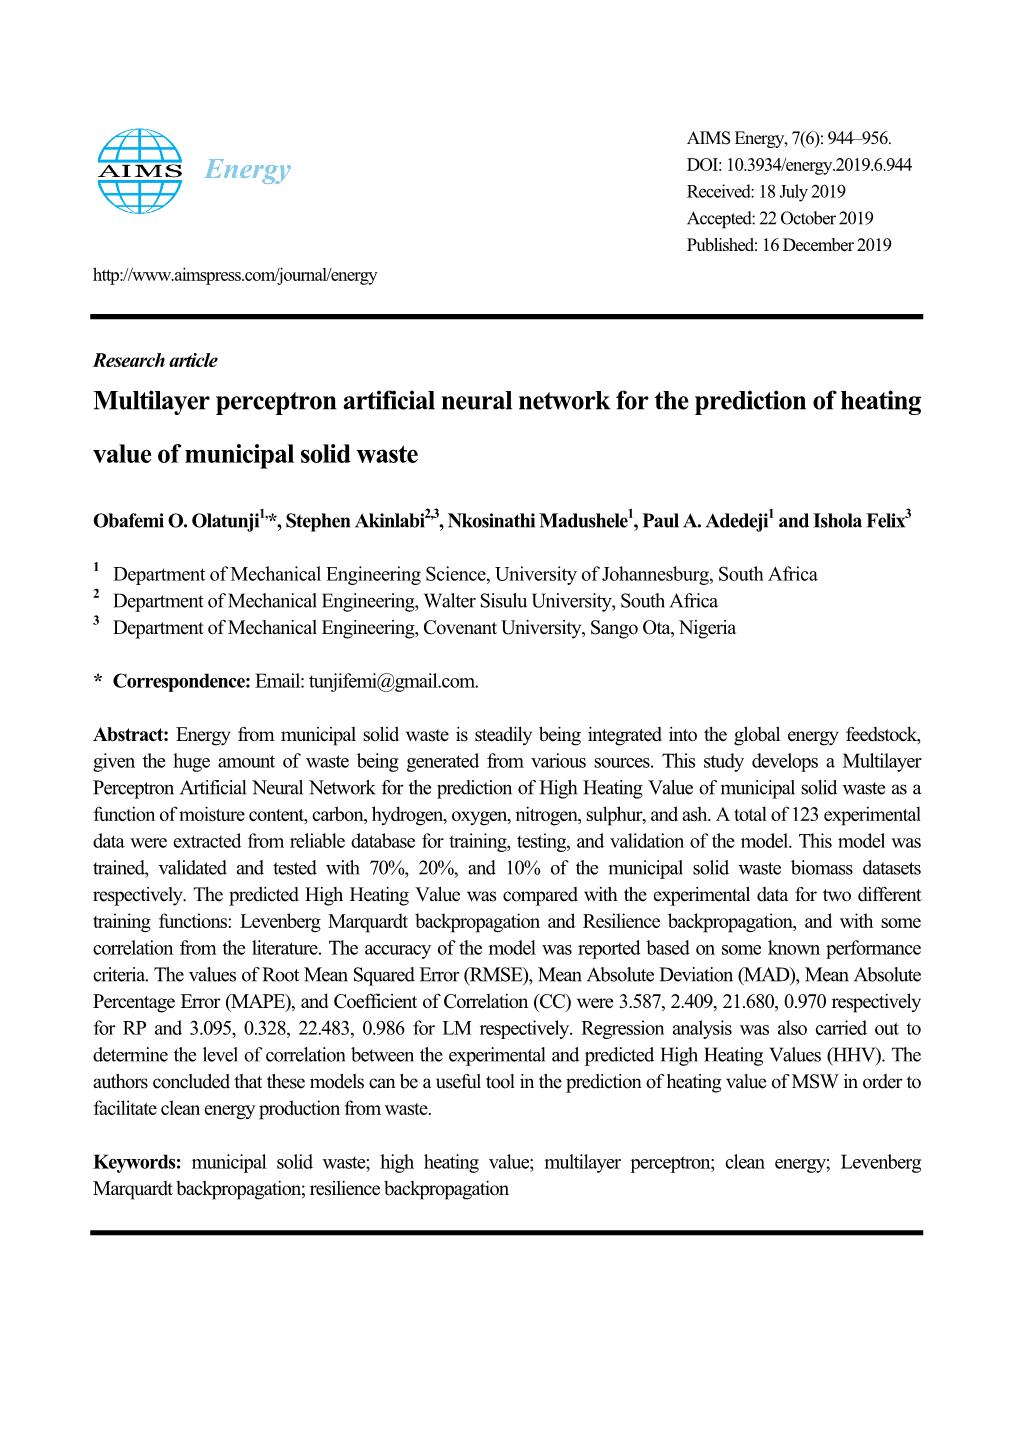 Multilayer Perceptron Artificial Neural Network for the Prediction of Heating Value of Municipal Solid Waste